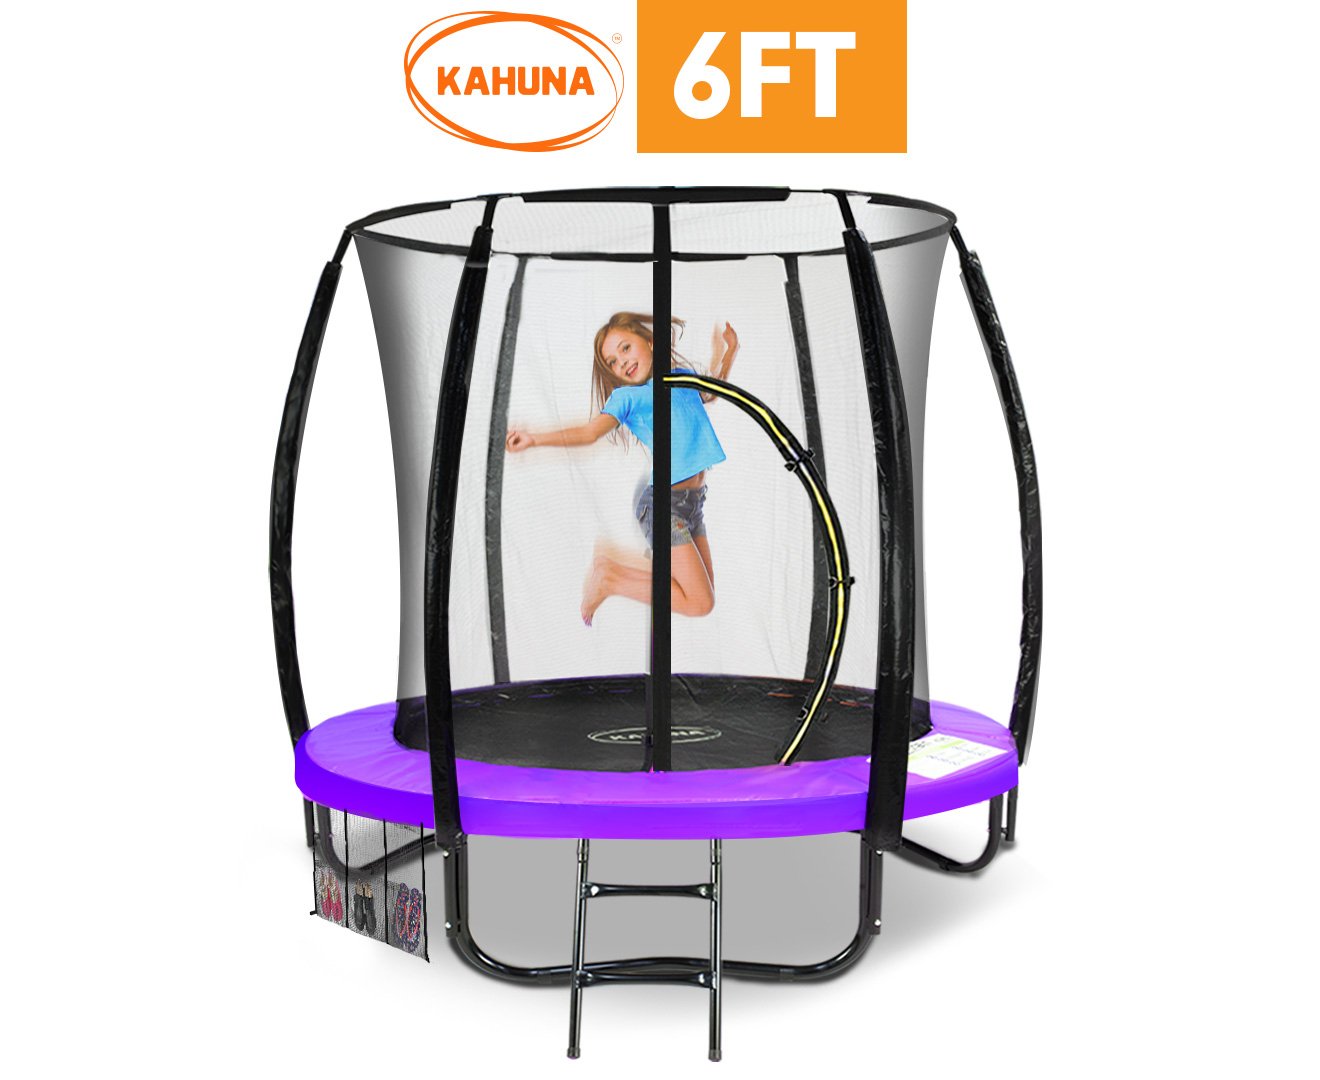 Kahuna Classic 6ft Trampoline Round Outdoor Free Safety Net Spring Pad Cover Mat Purple